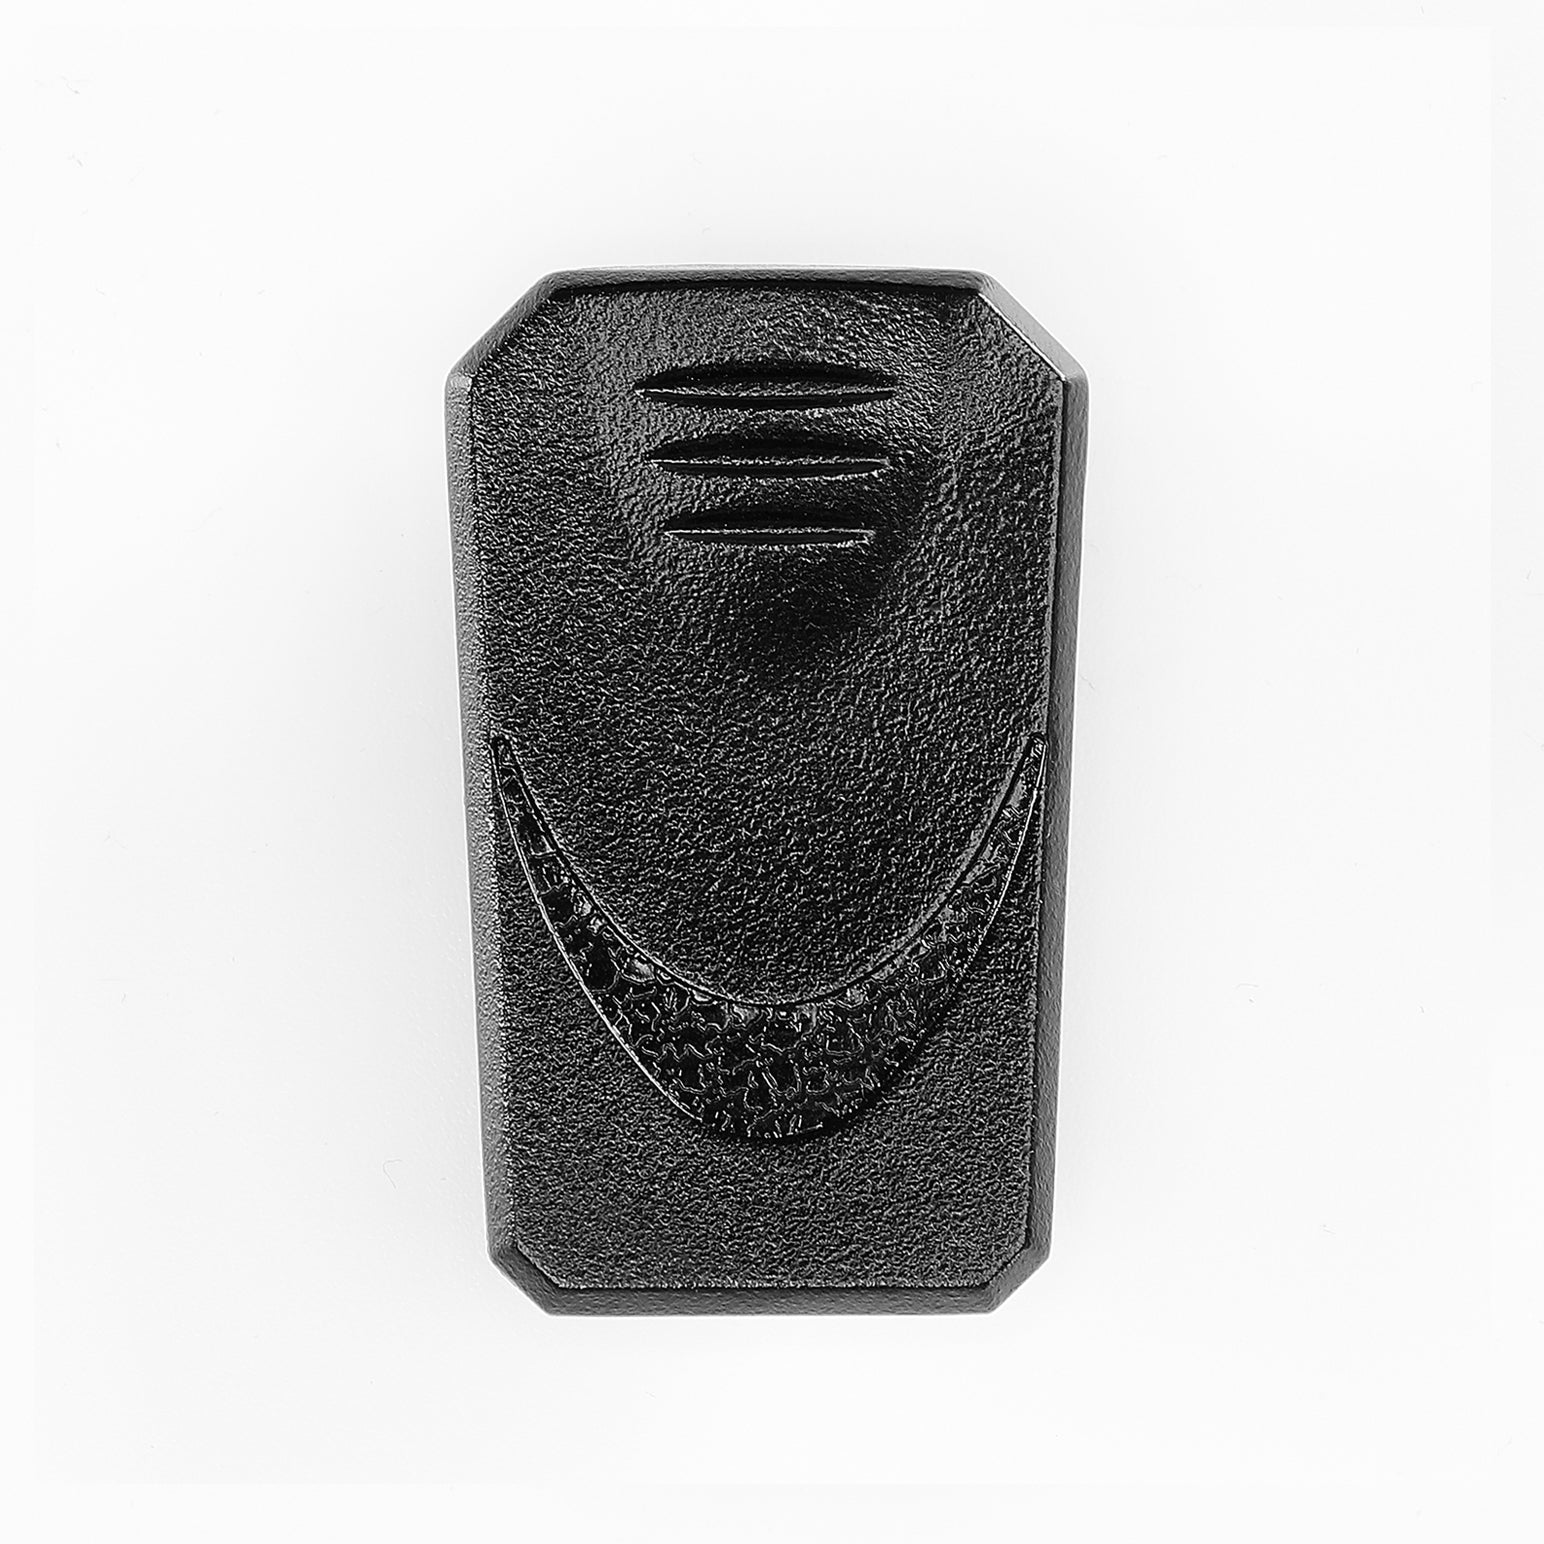 BOBLOV M5 / T5 Short Clip, A Back Clip ONLY M5 OR T5 Body Worn Camera, Only Included ONE Short Clip (Can't fit Other Models)